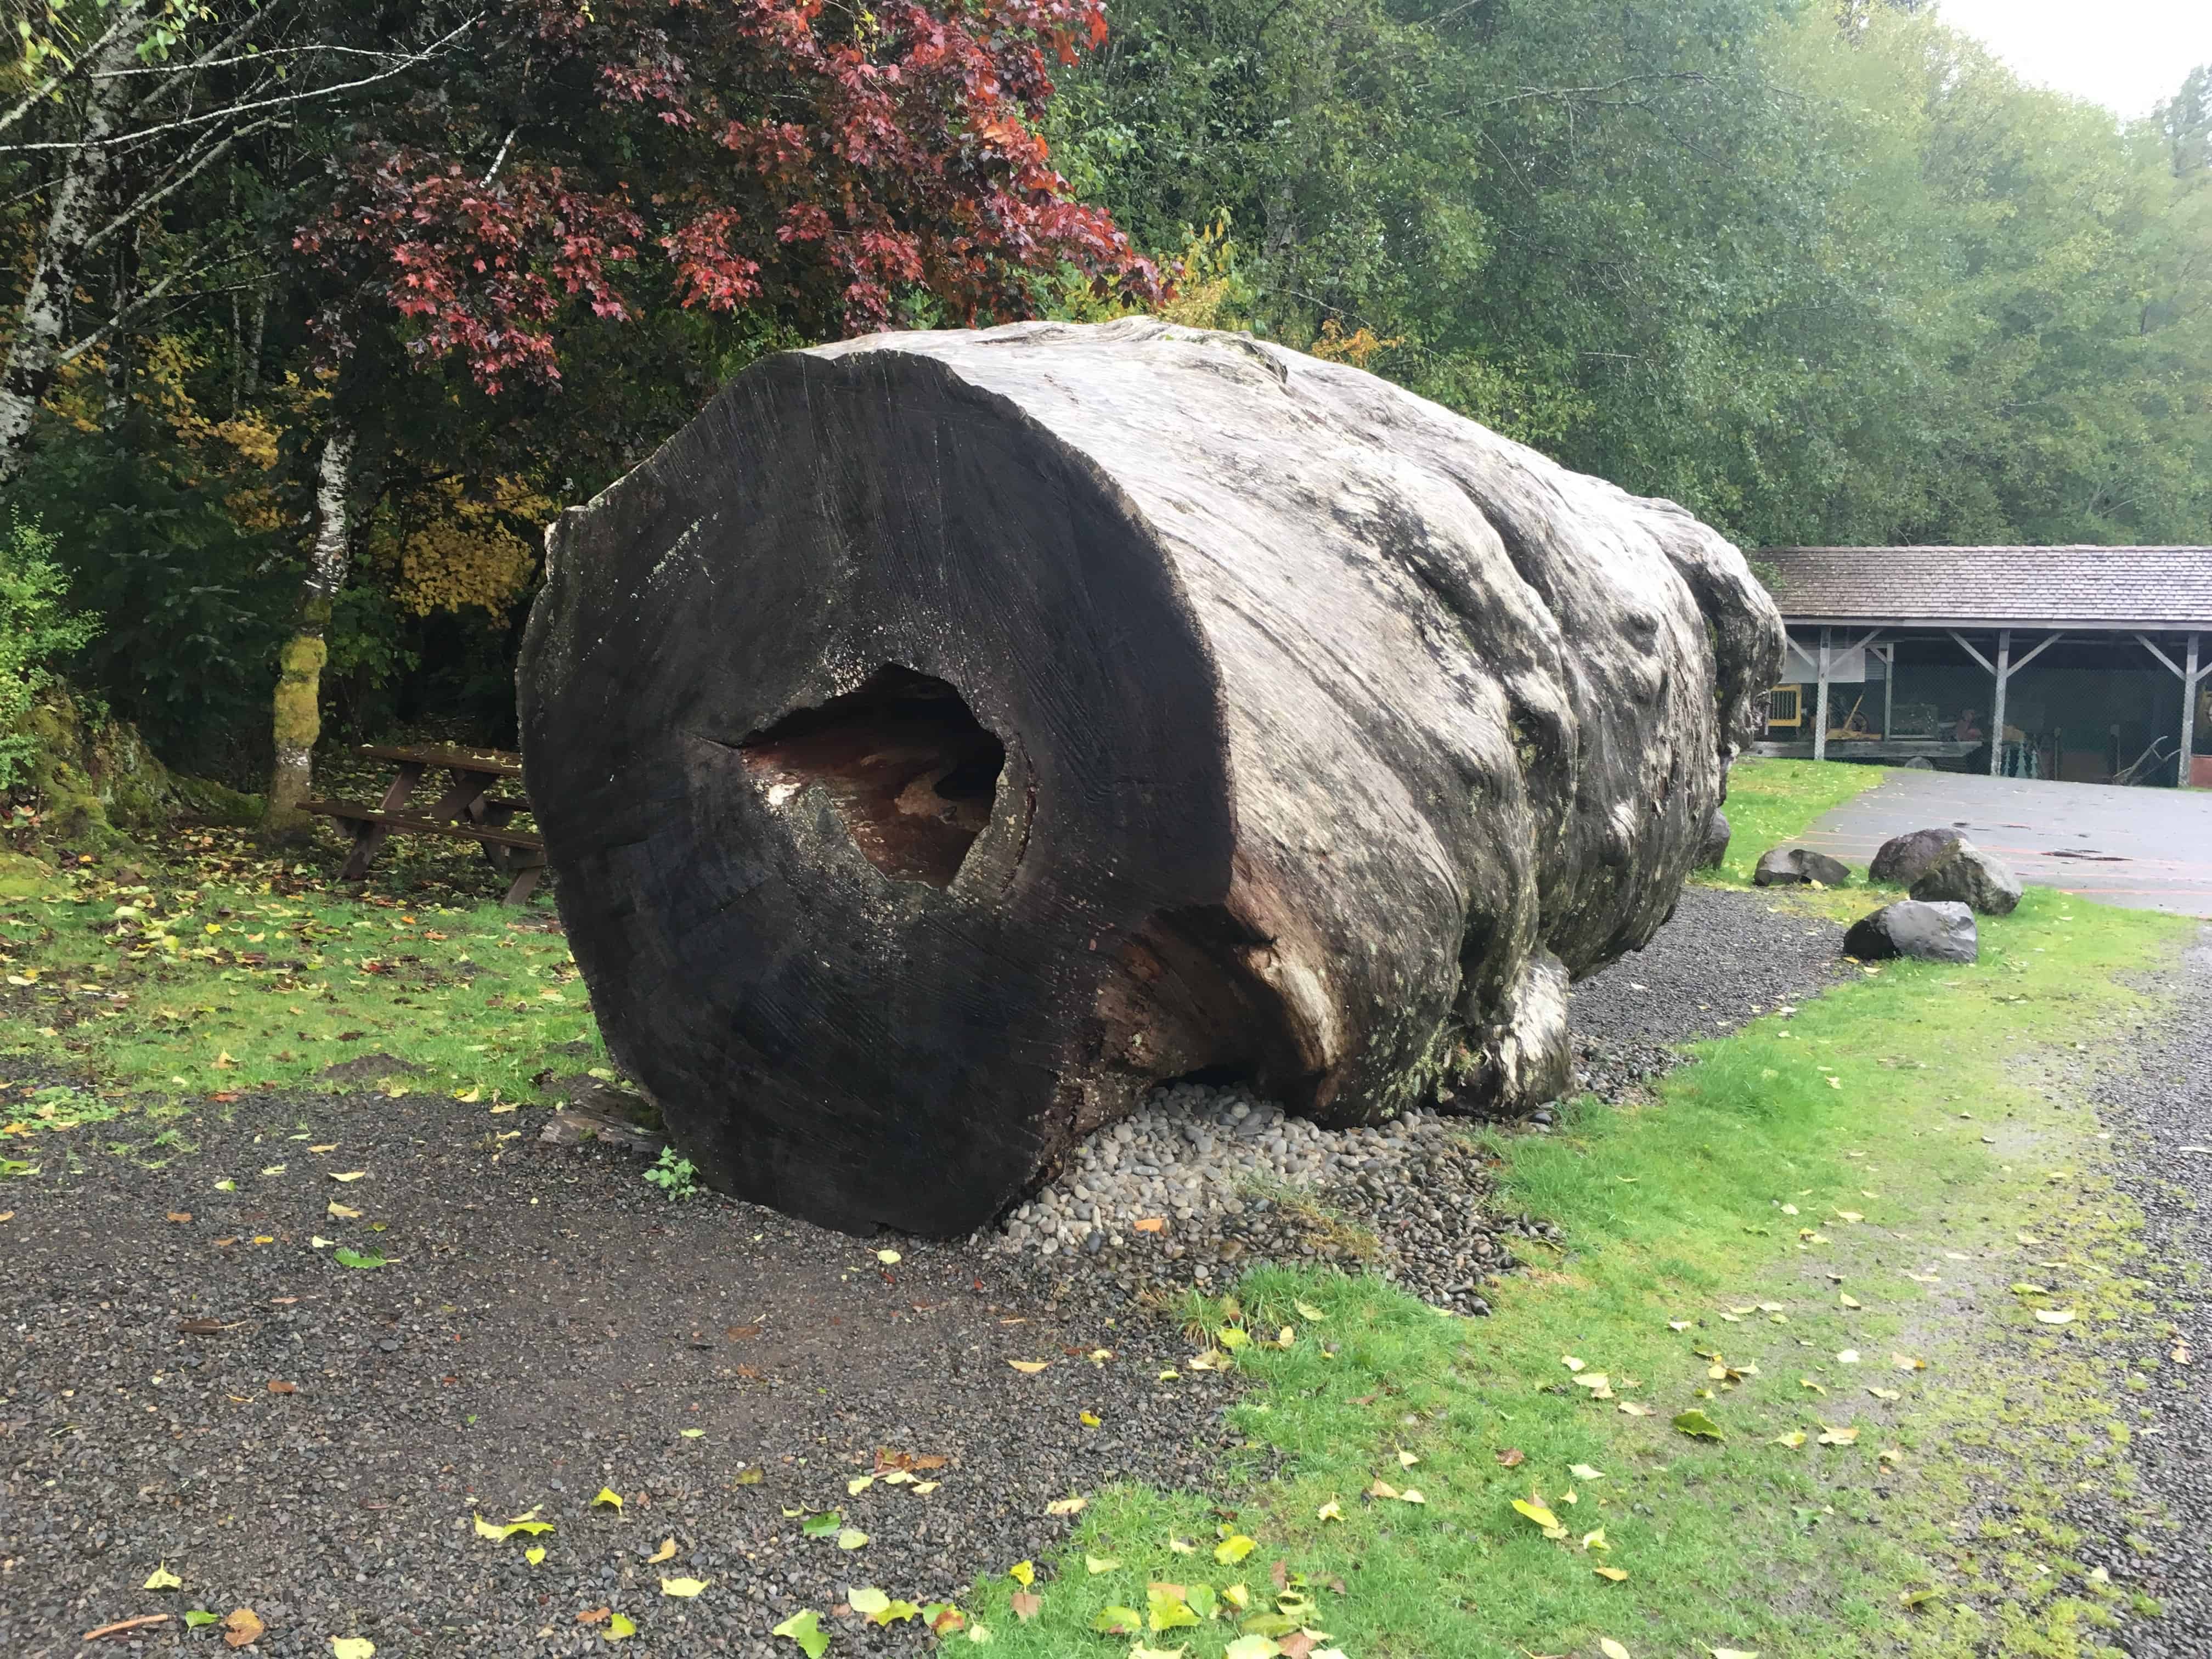 Hollowed out log at the Forks Timber Museum in Forks, Washington